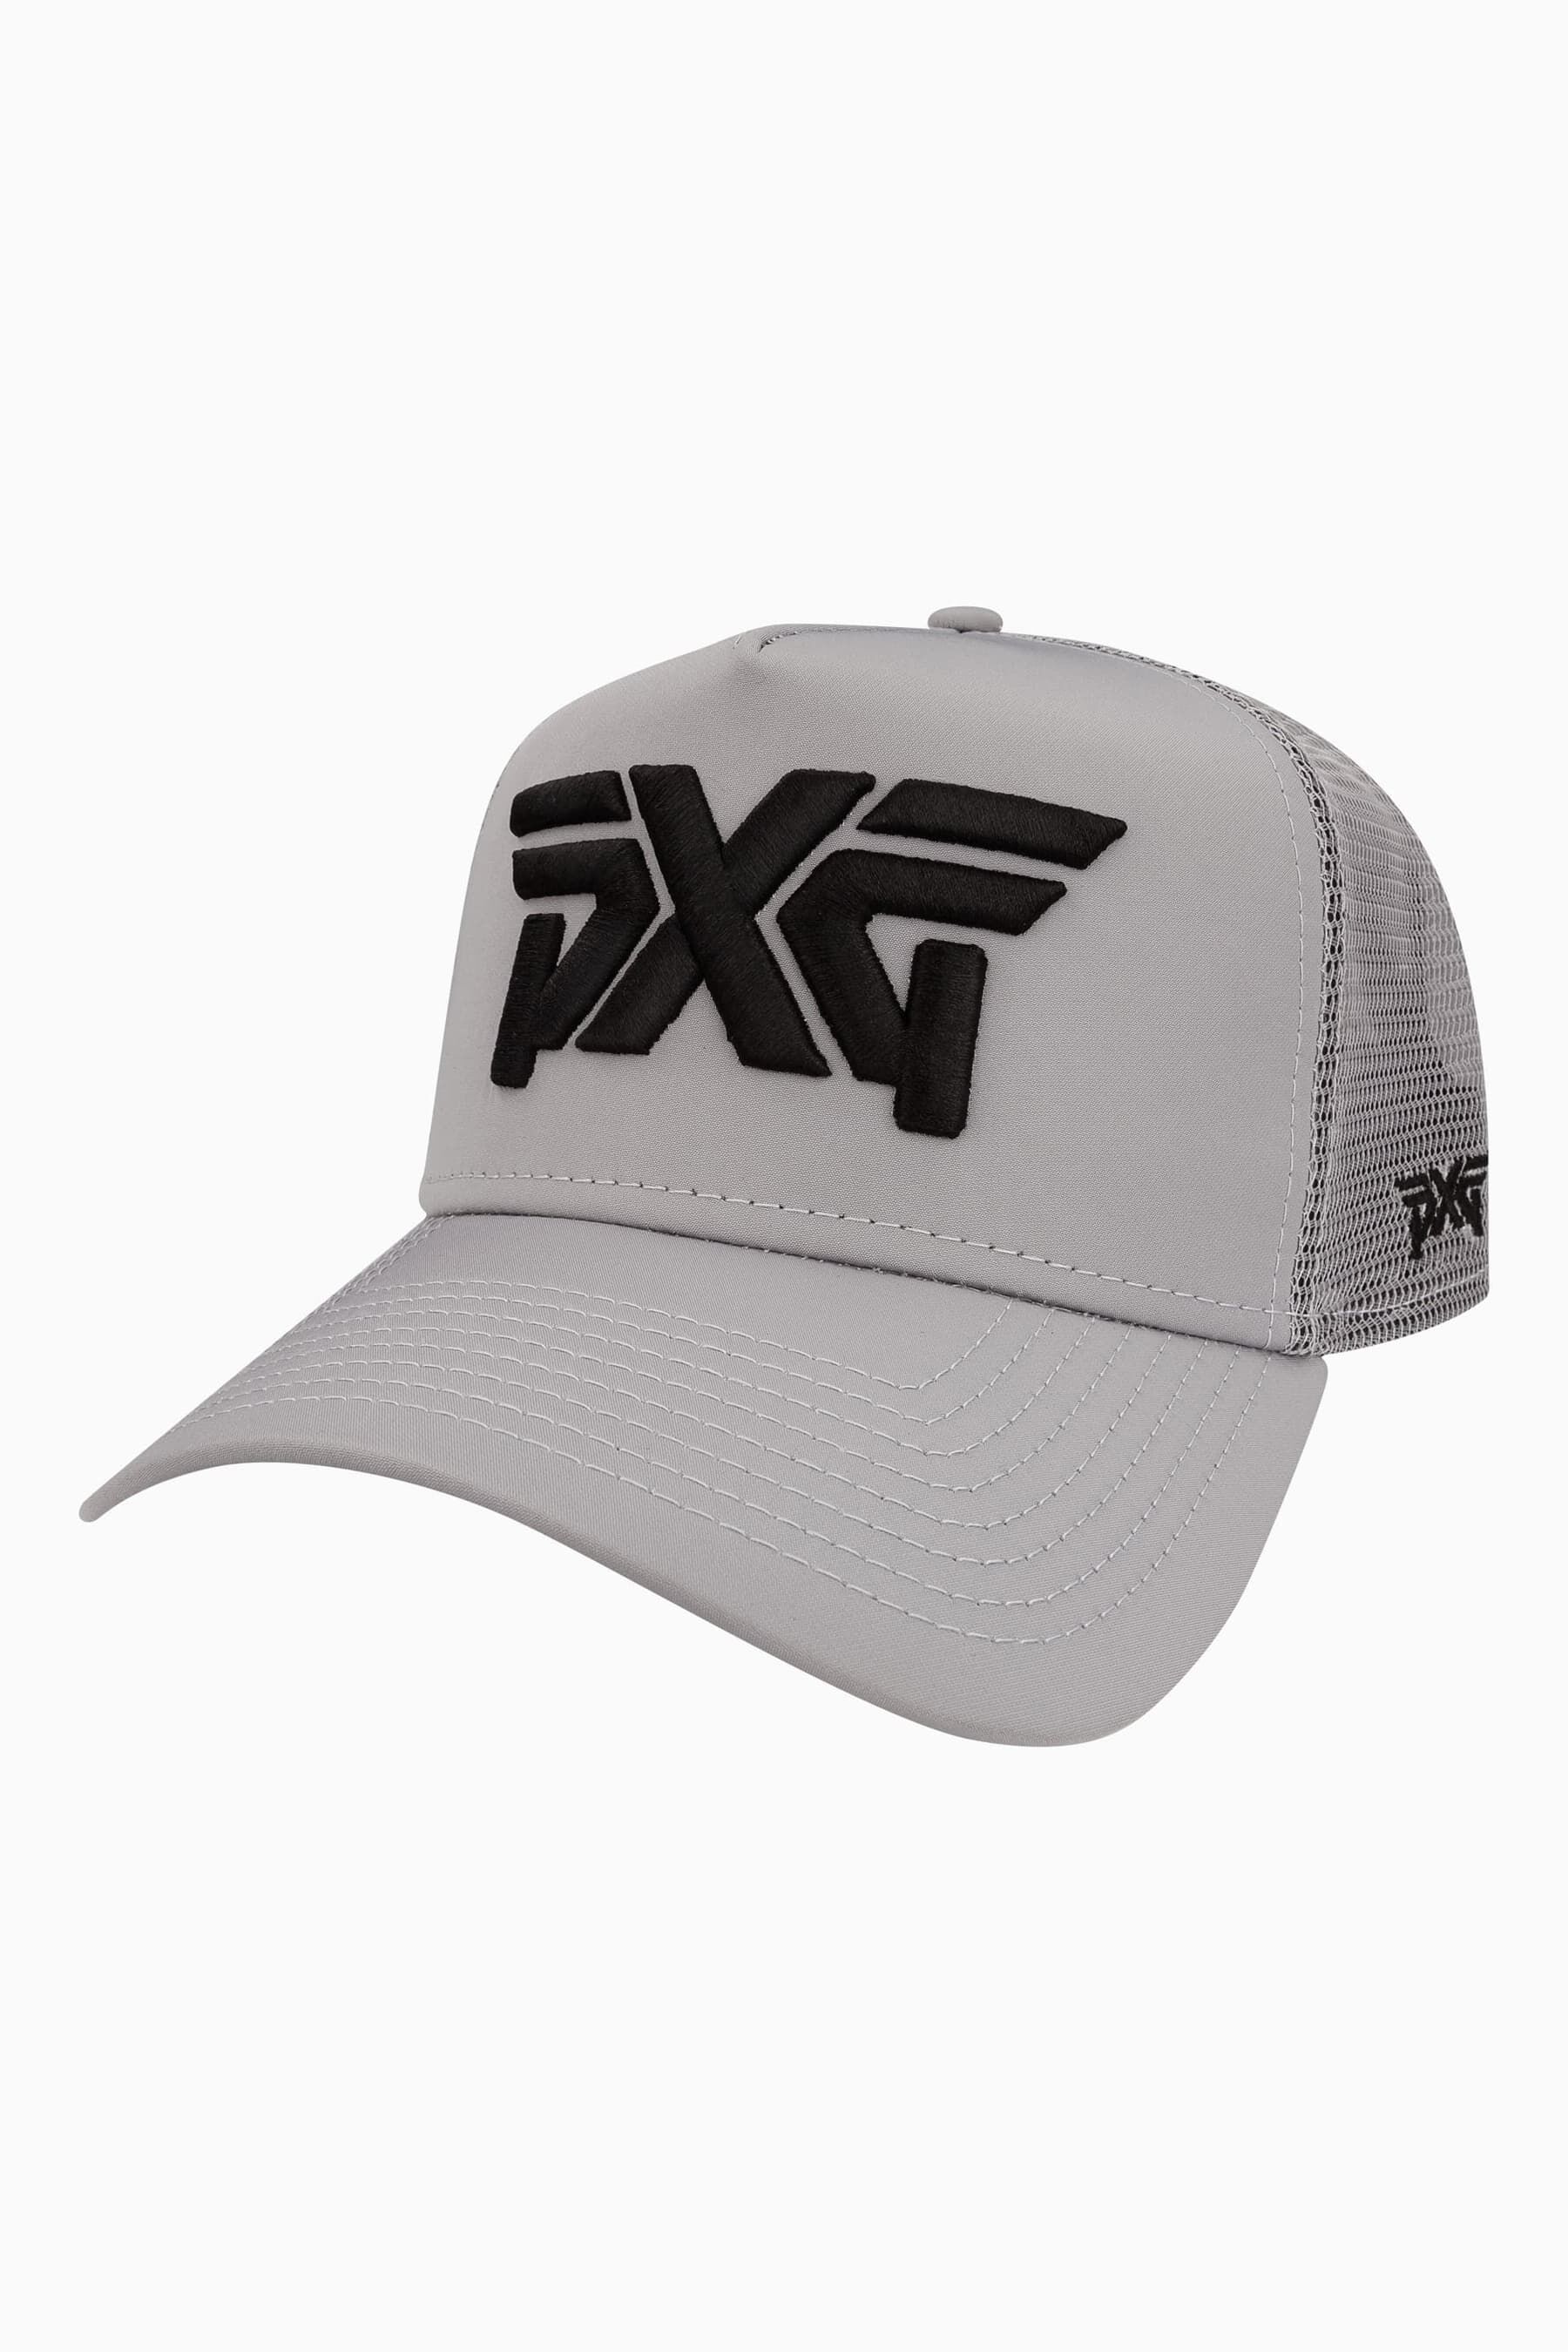 A-Frame 9FORTY Snapback Trucker Cap | Shop the Highest Quality